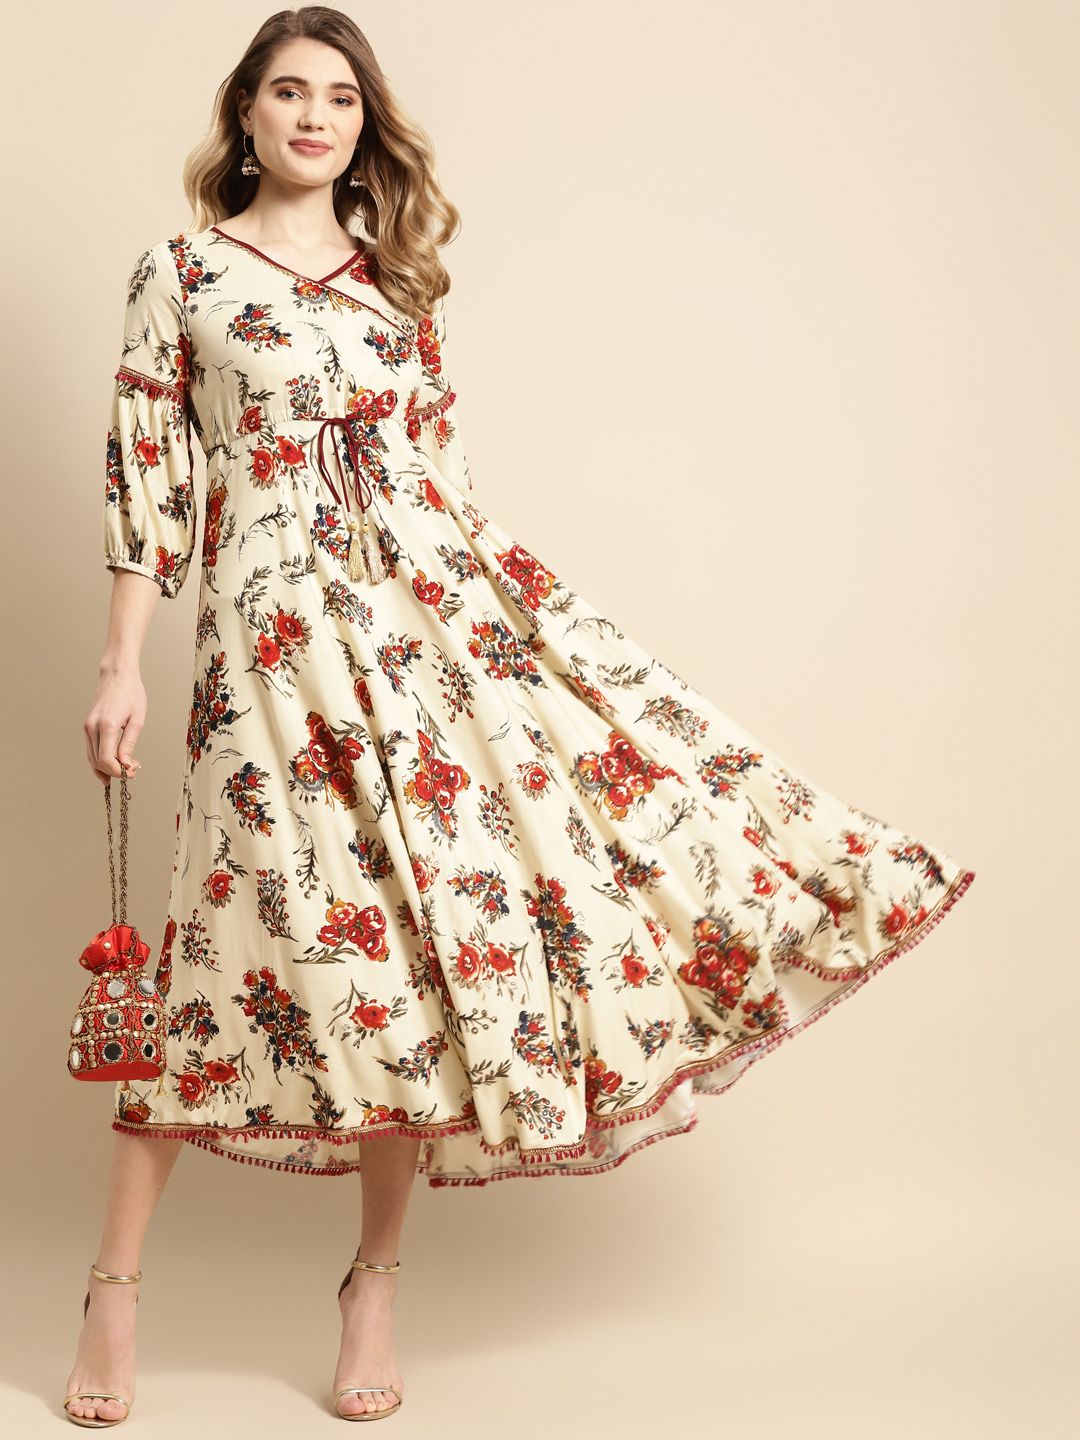 RANGMAYEE Off White & Red Floral A-Line Midi Dress Price in India